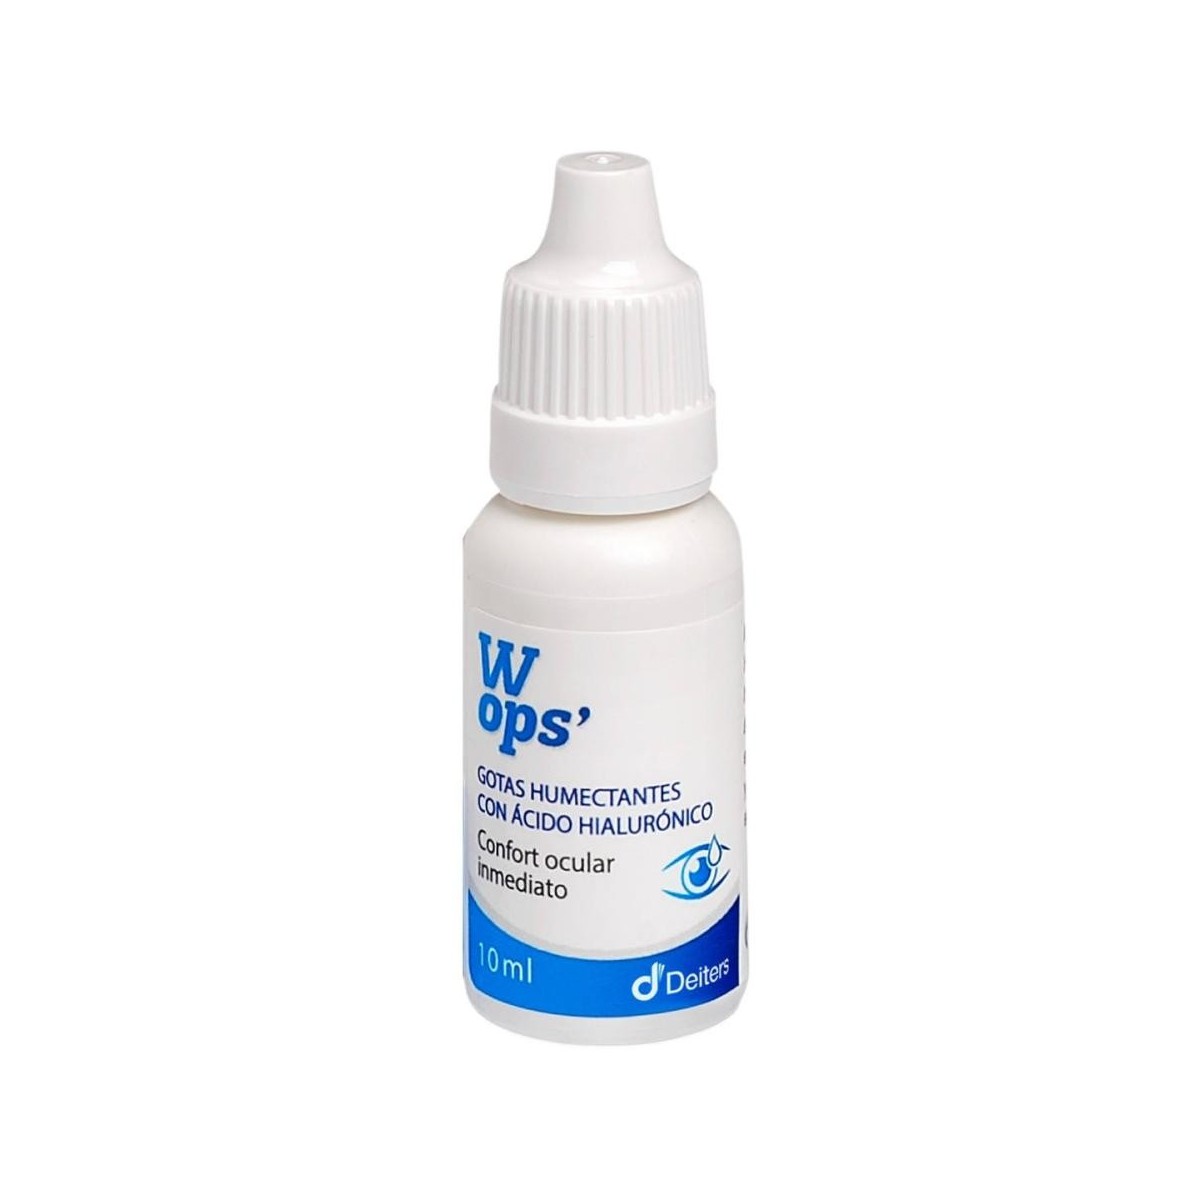 wops gotas humectantes 10 ml